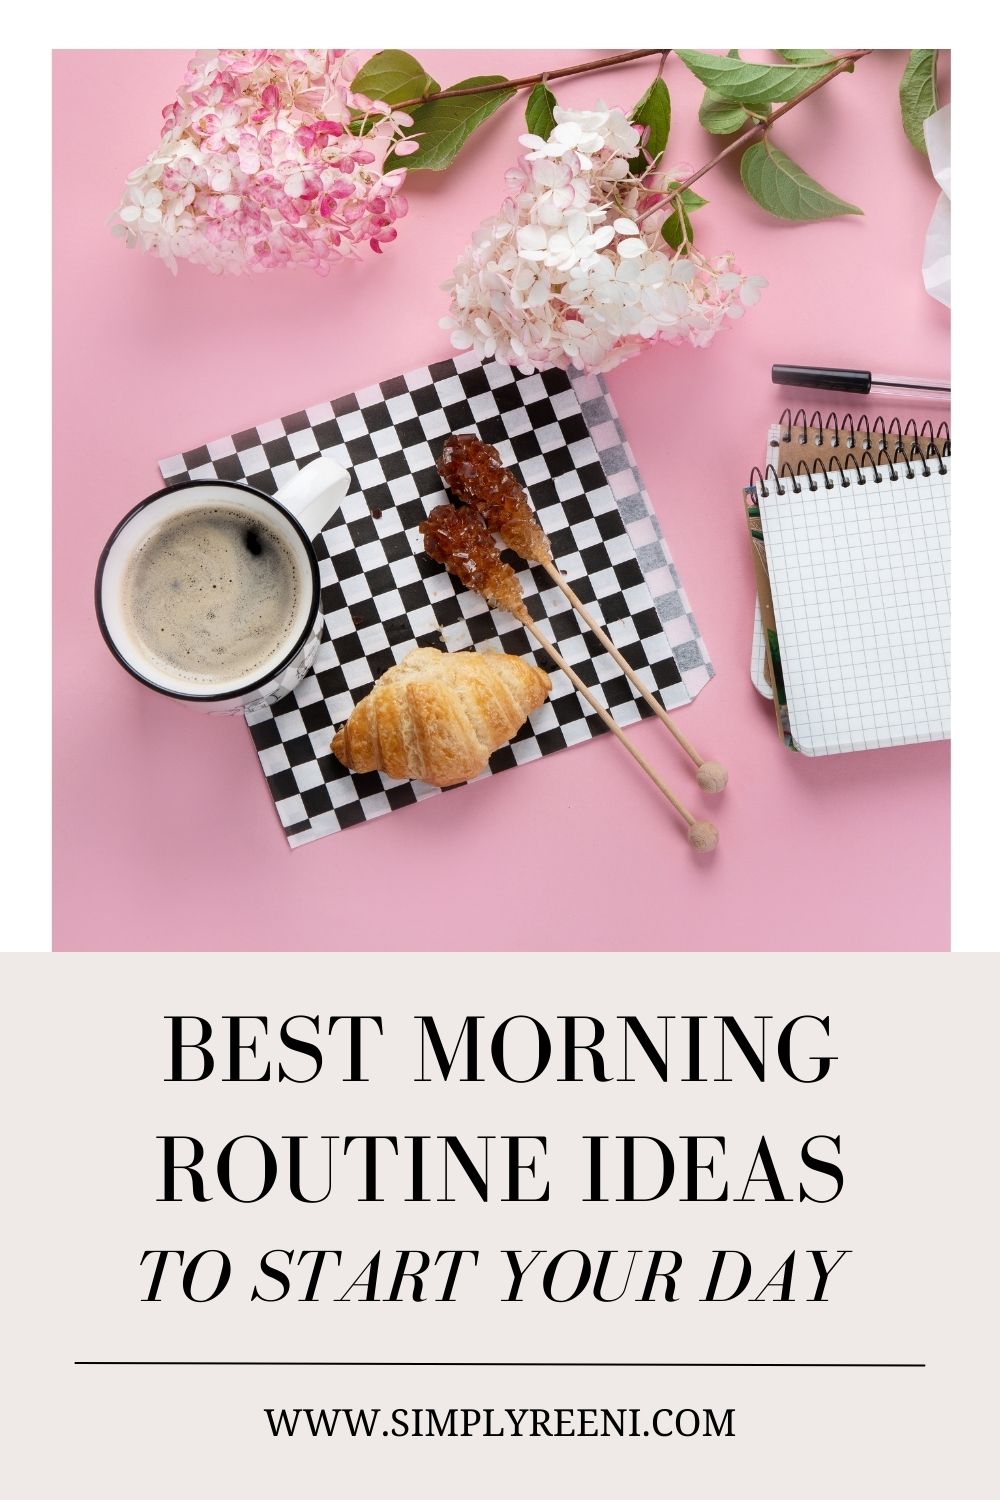 12 Healthy Morning Routine Ideas - Simply Reeni